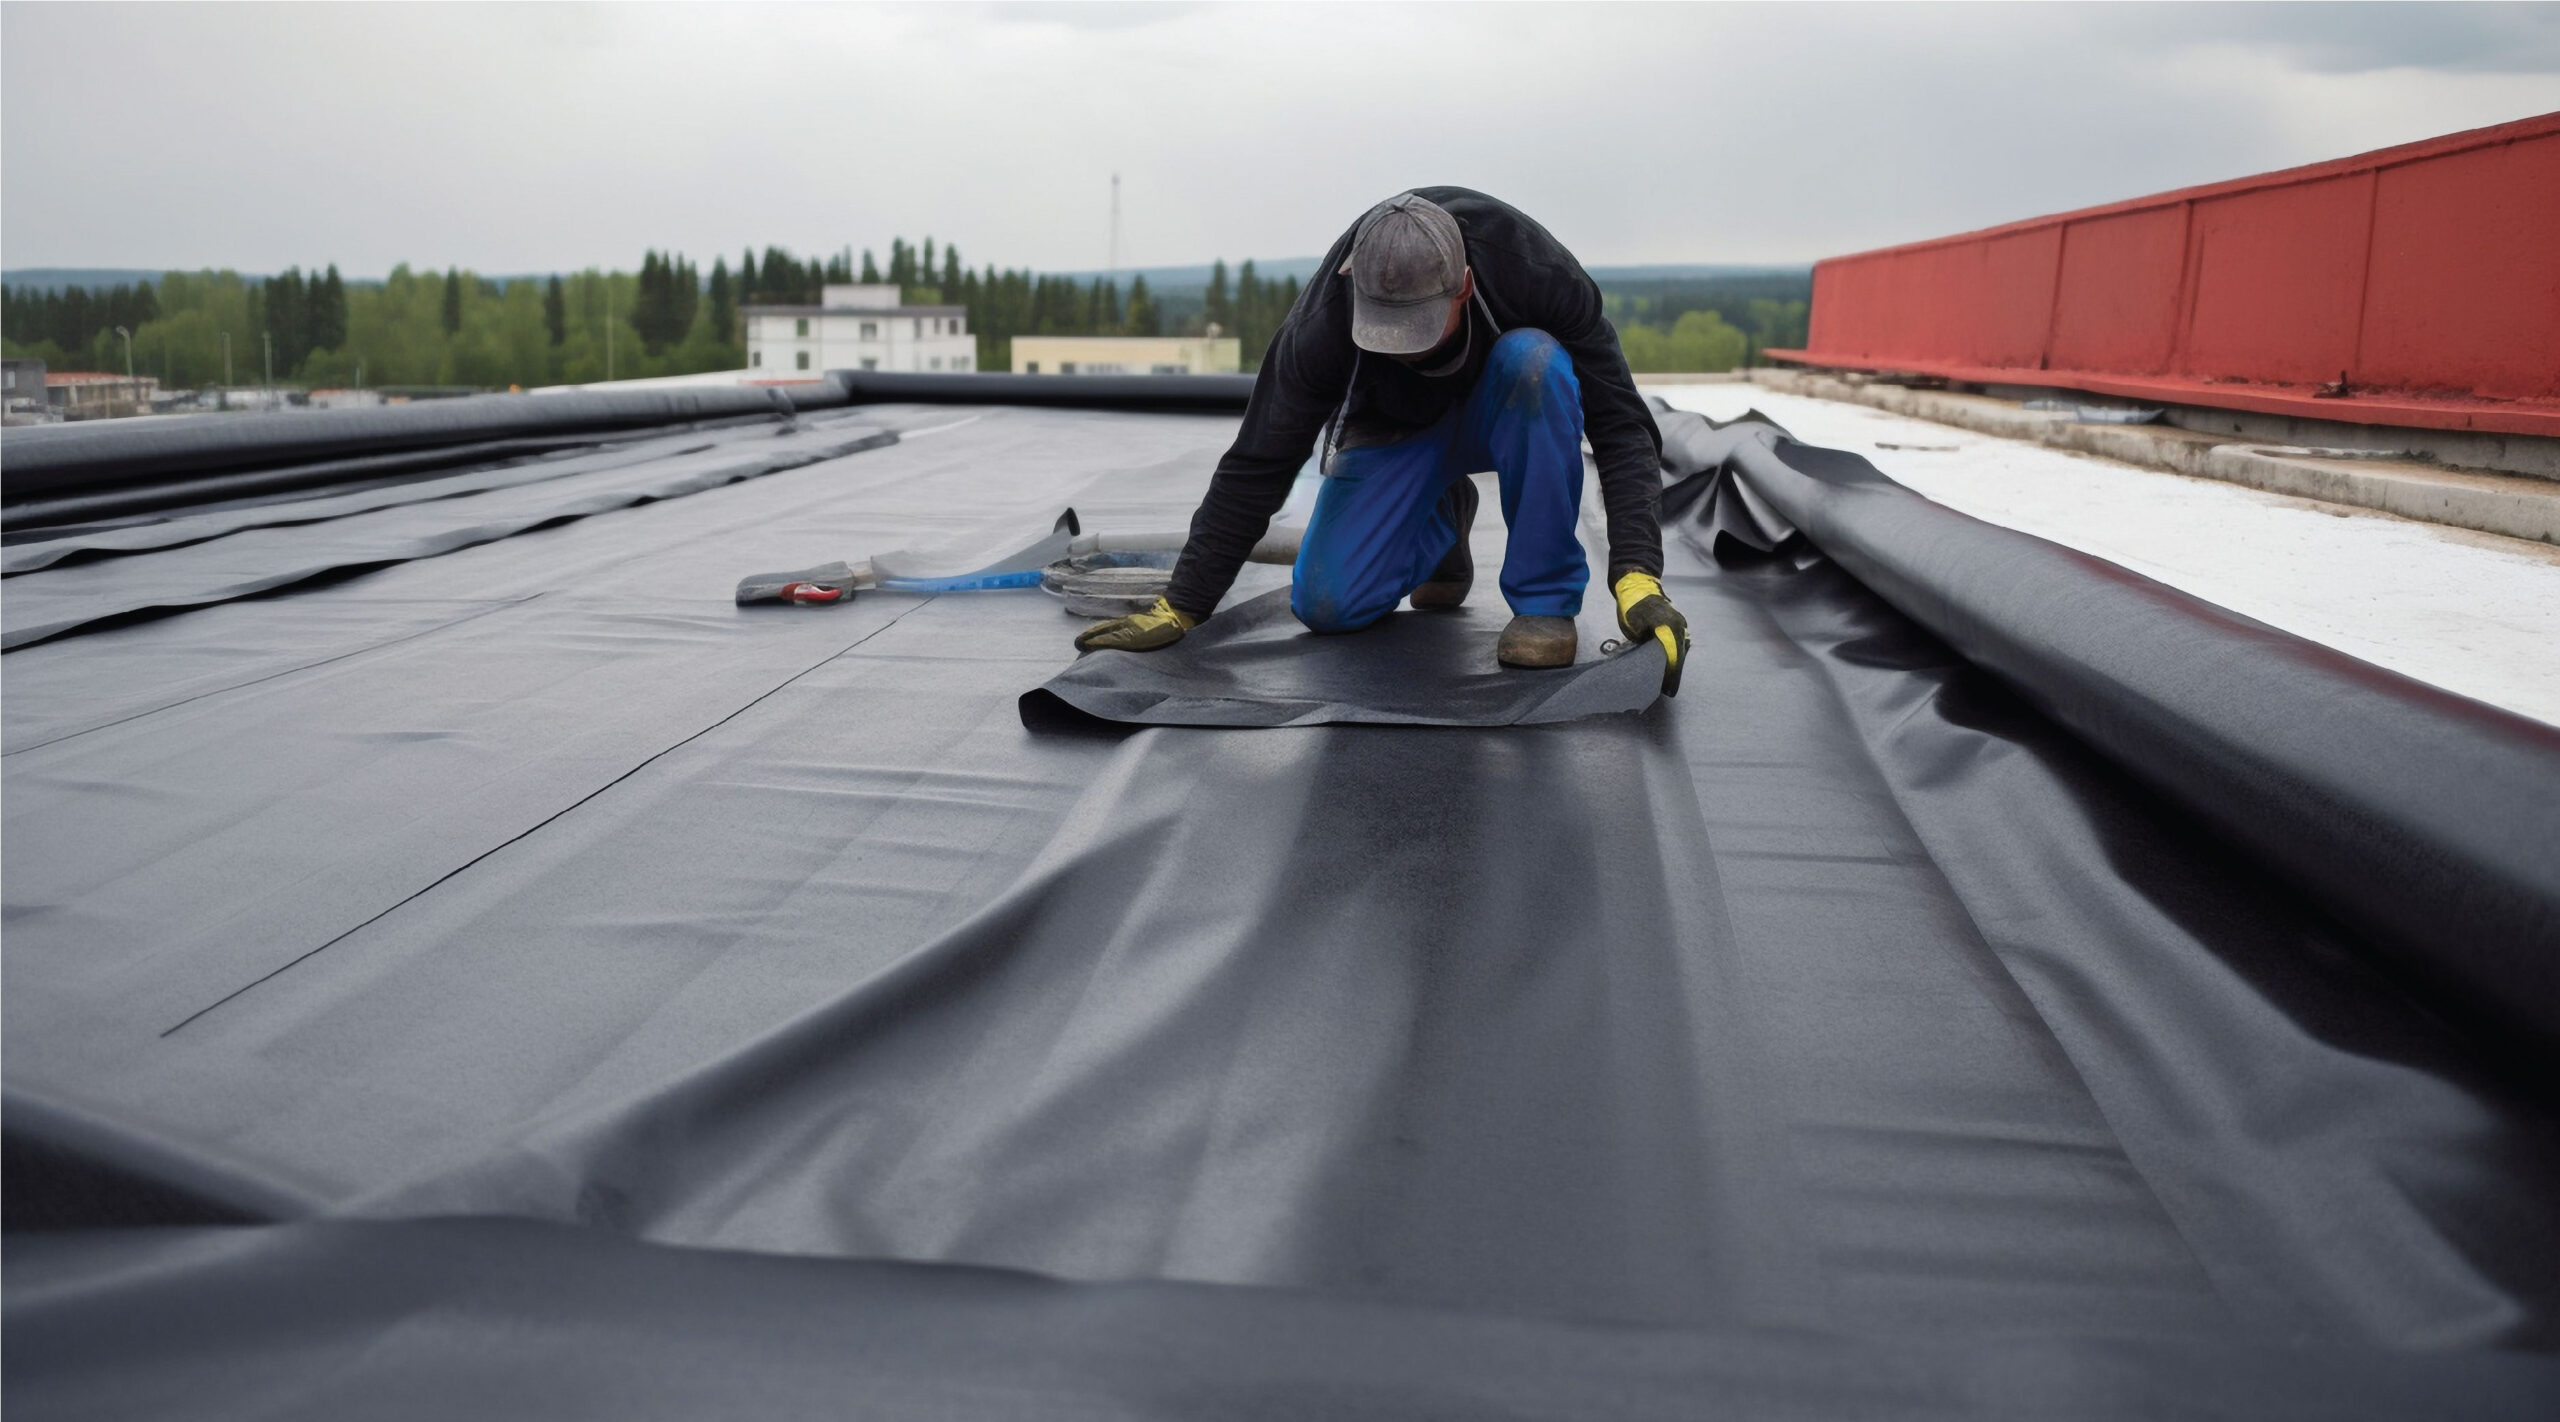 Services_Roofing and Waterproofing services 4